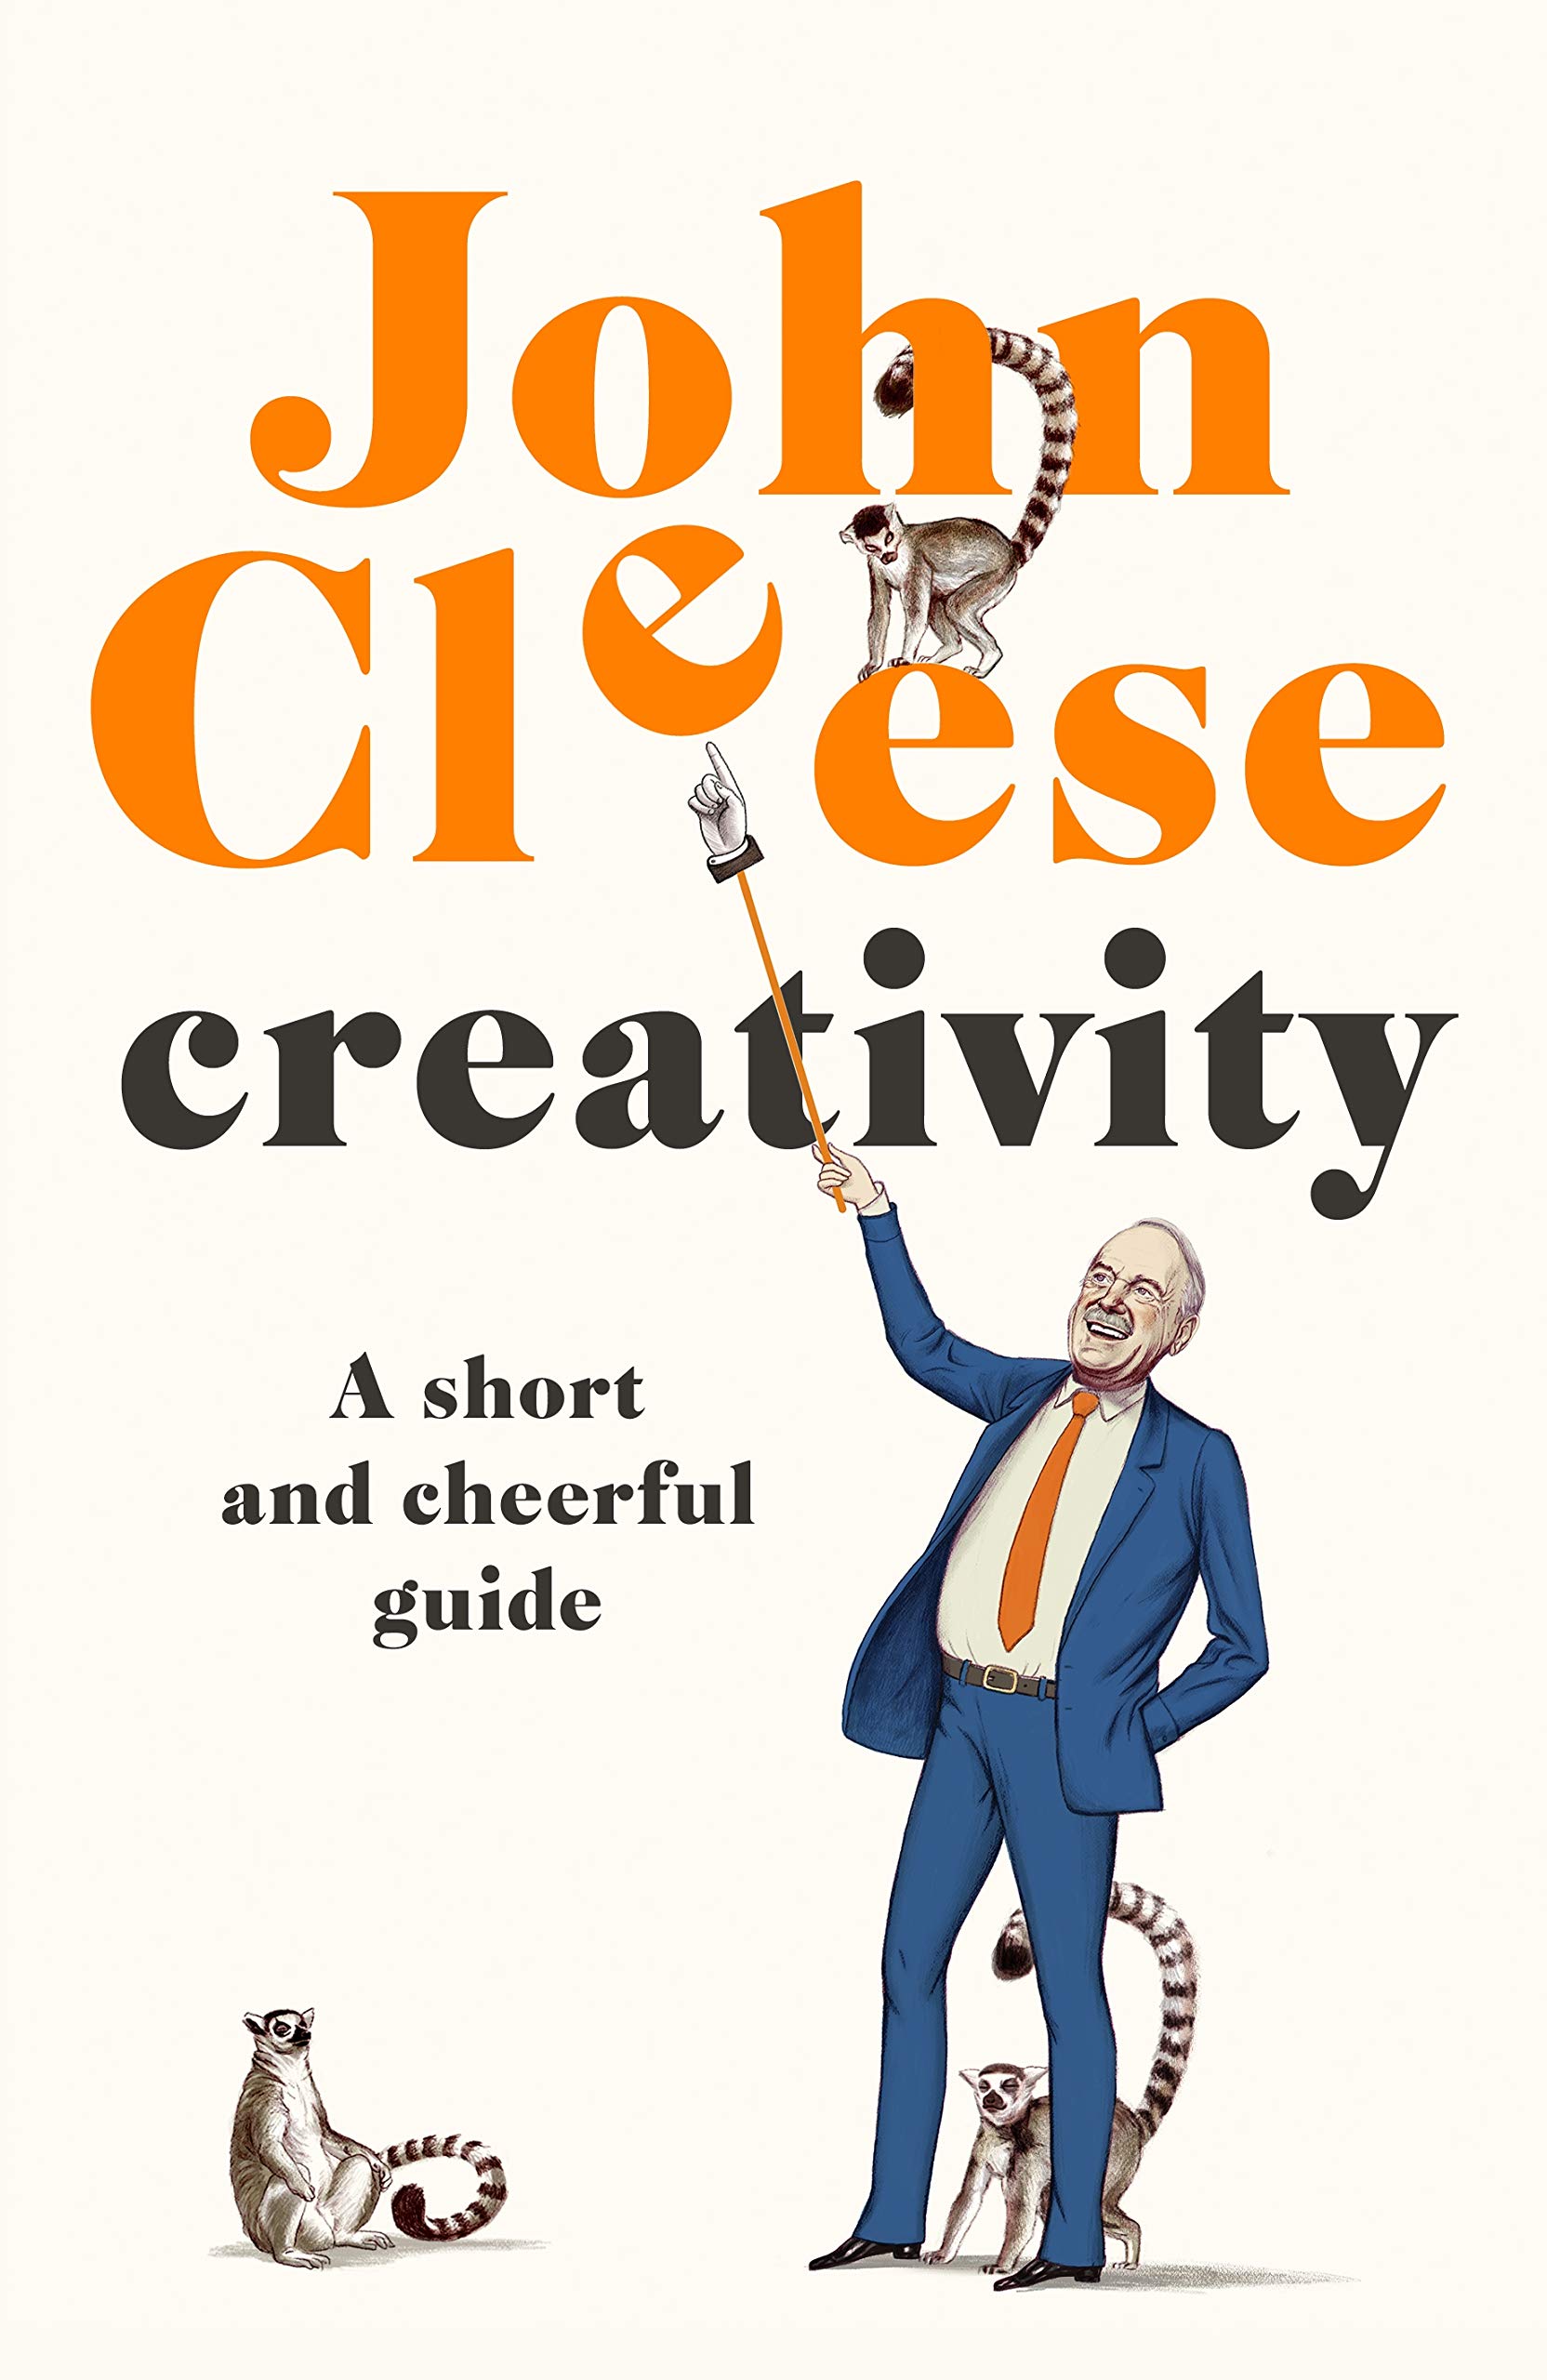 Creativity: A Short and Cheerful Guide | John Cleese